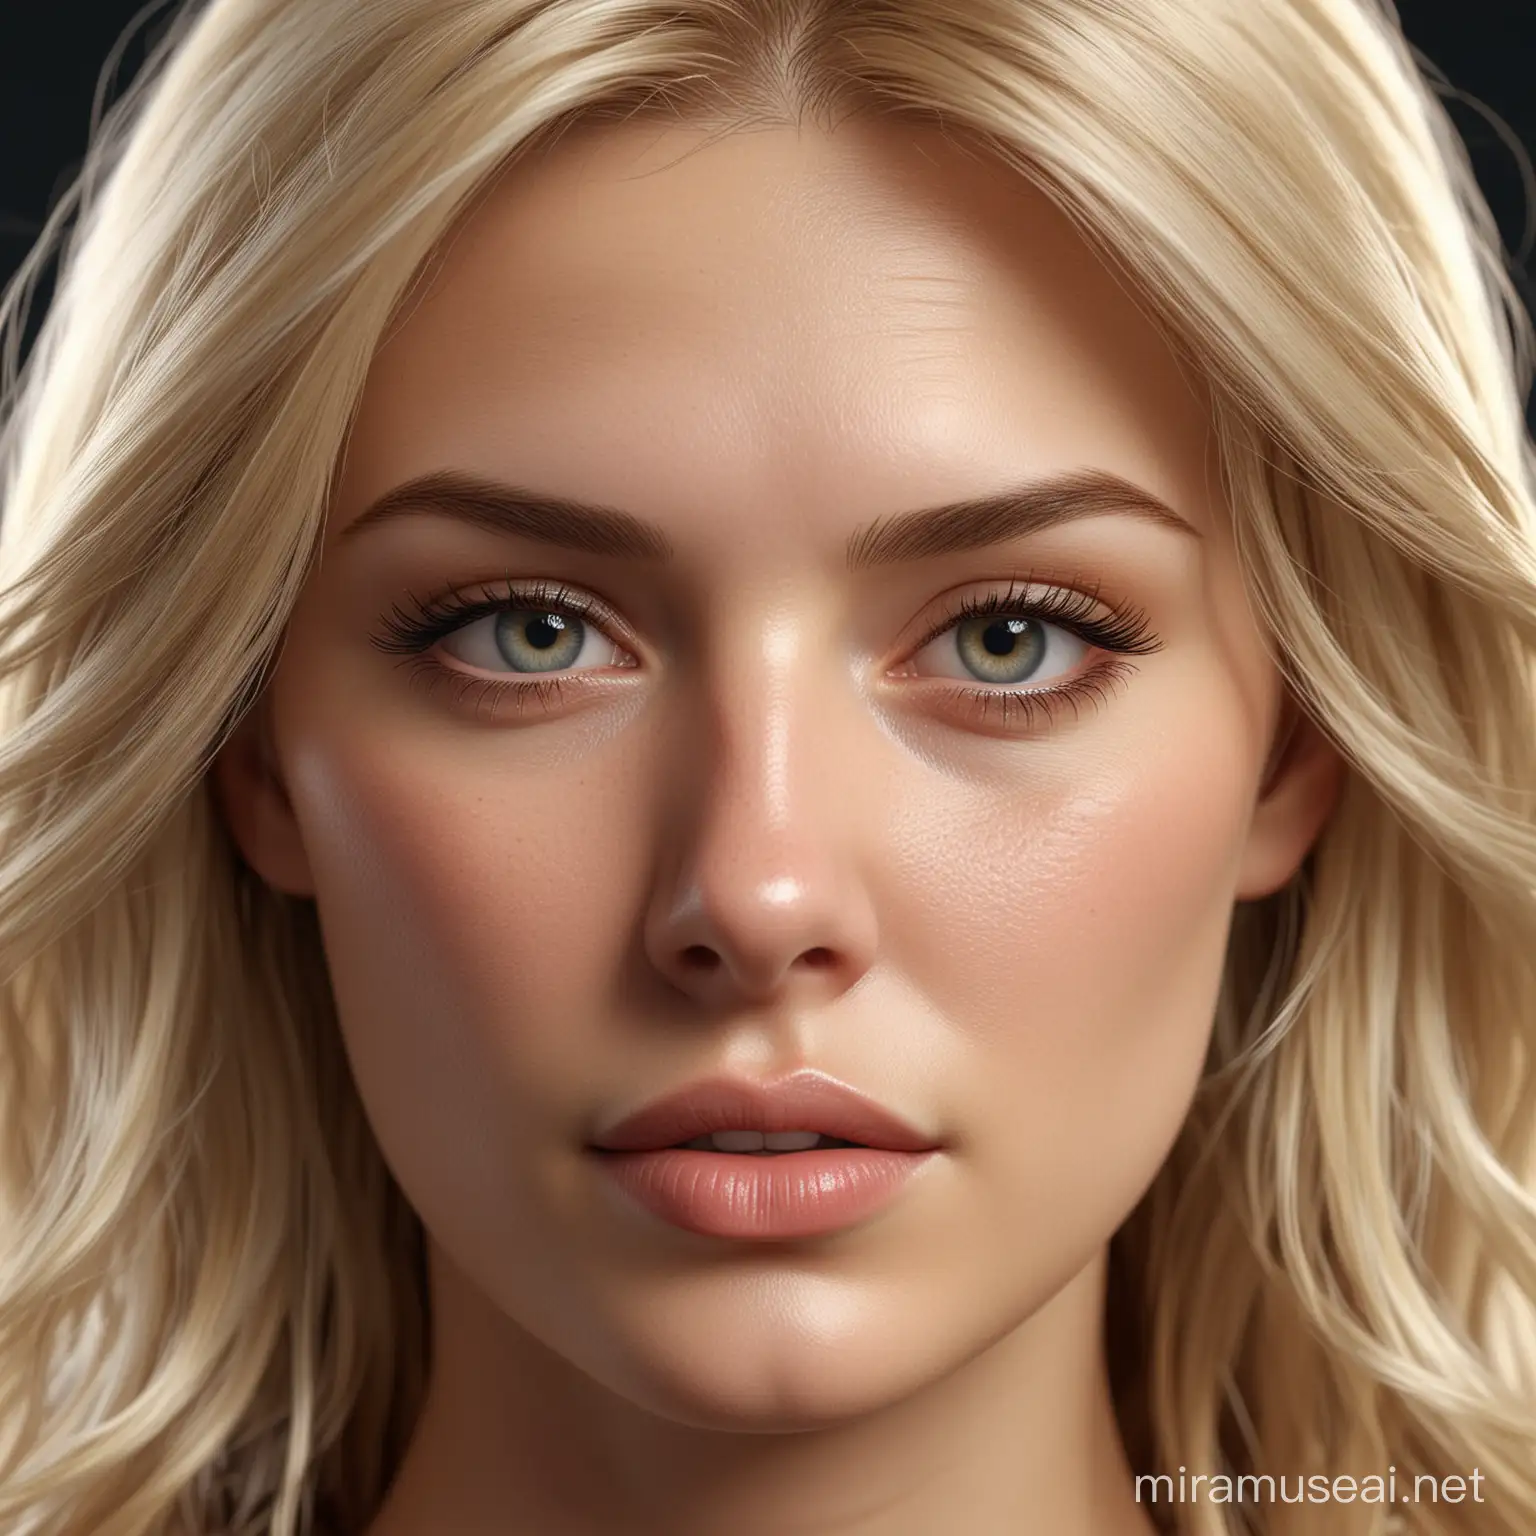 Realistic Portrait of a Mature Blonde Woman with Perfect Features